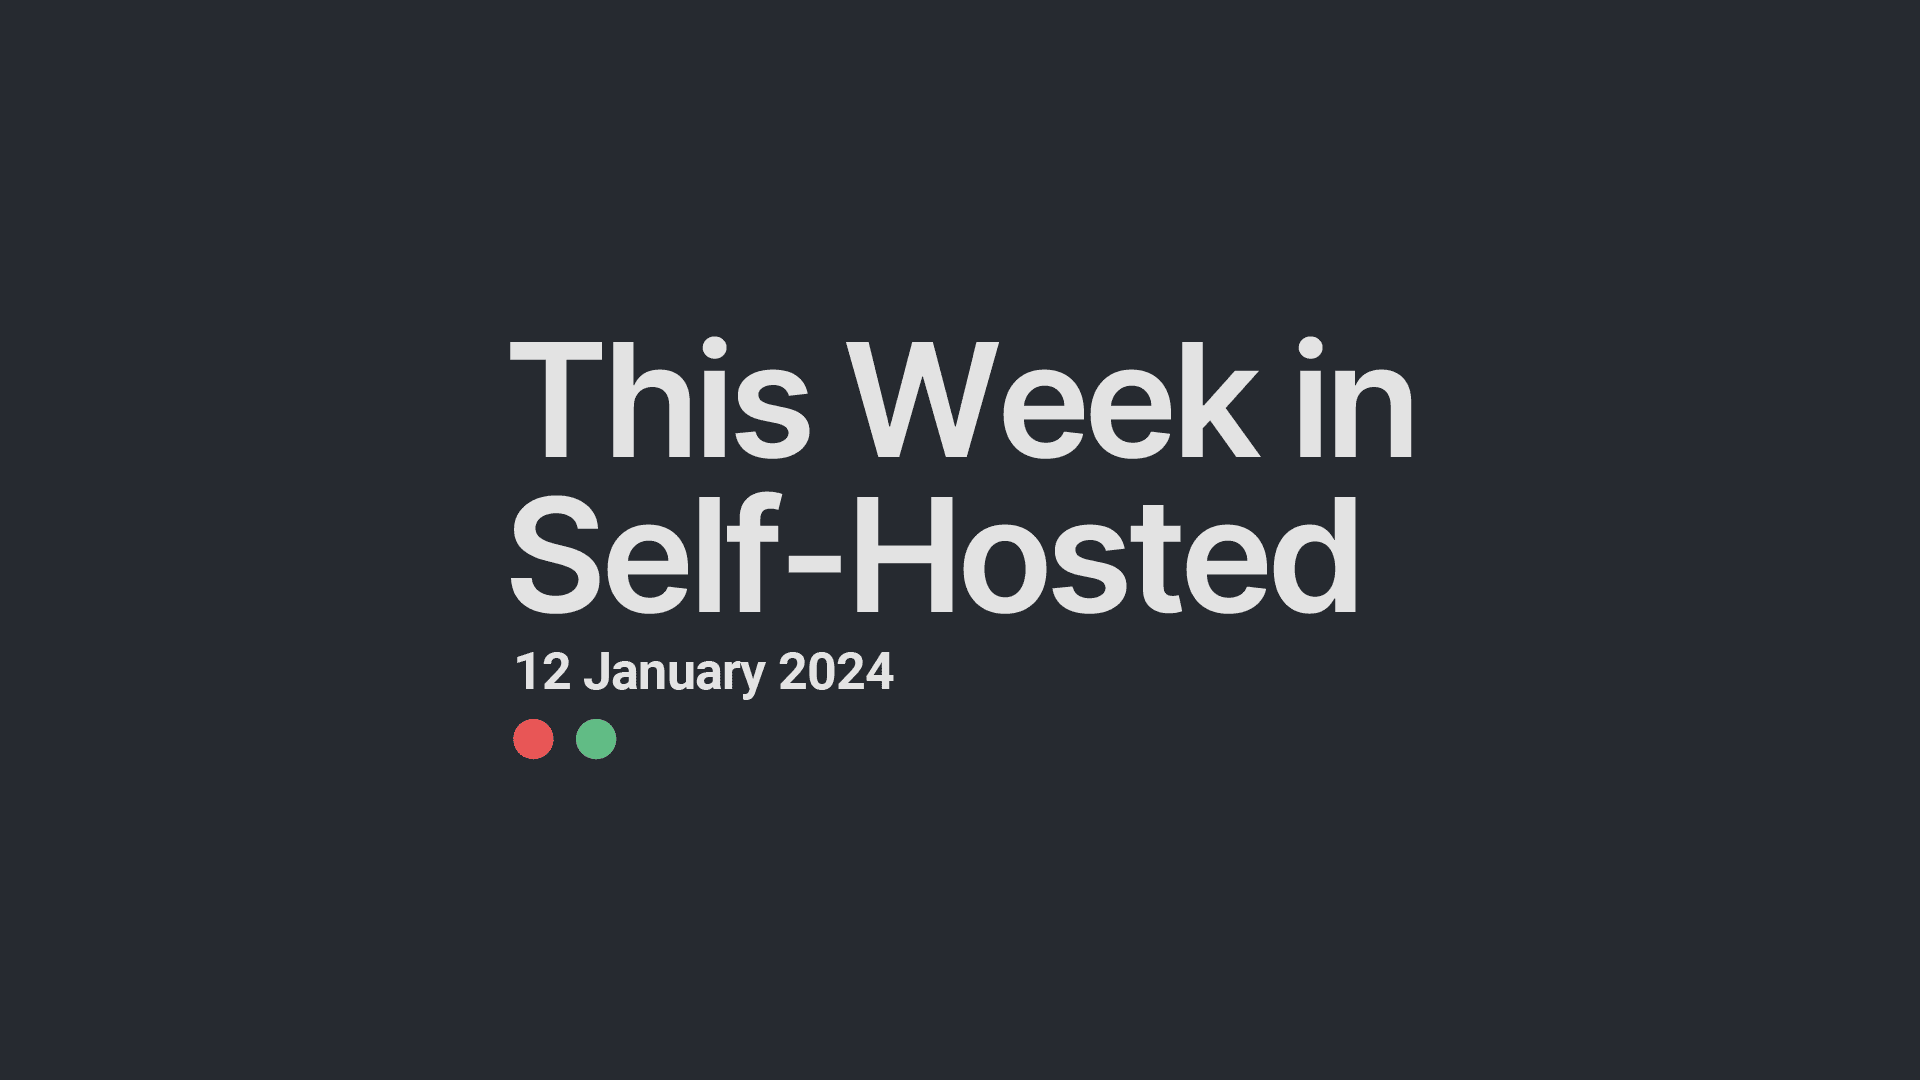 This Week in Self-Hosted (12 January 2024) Post image